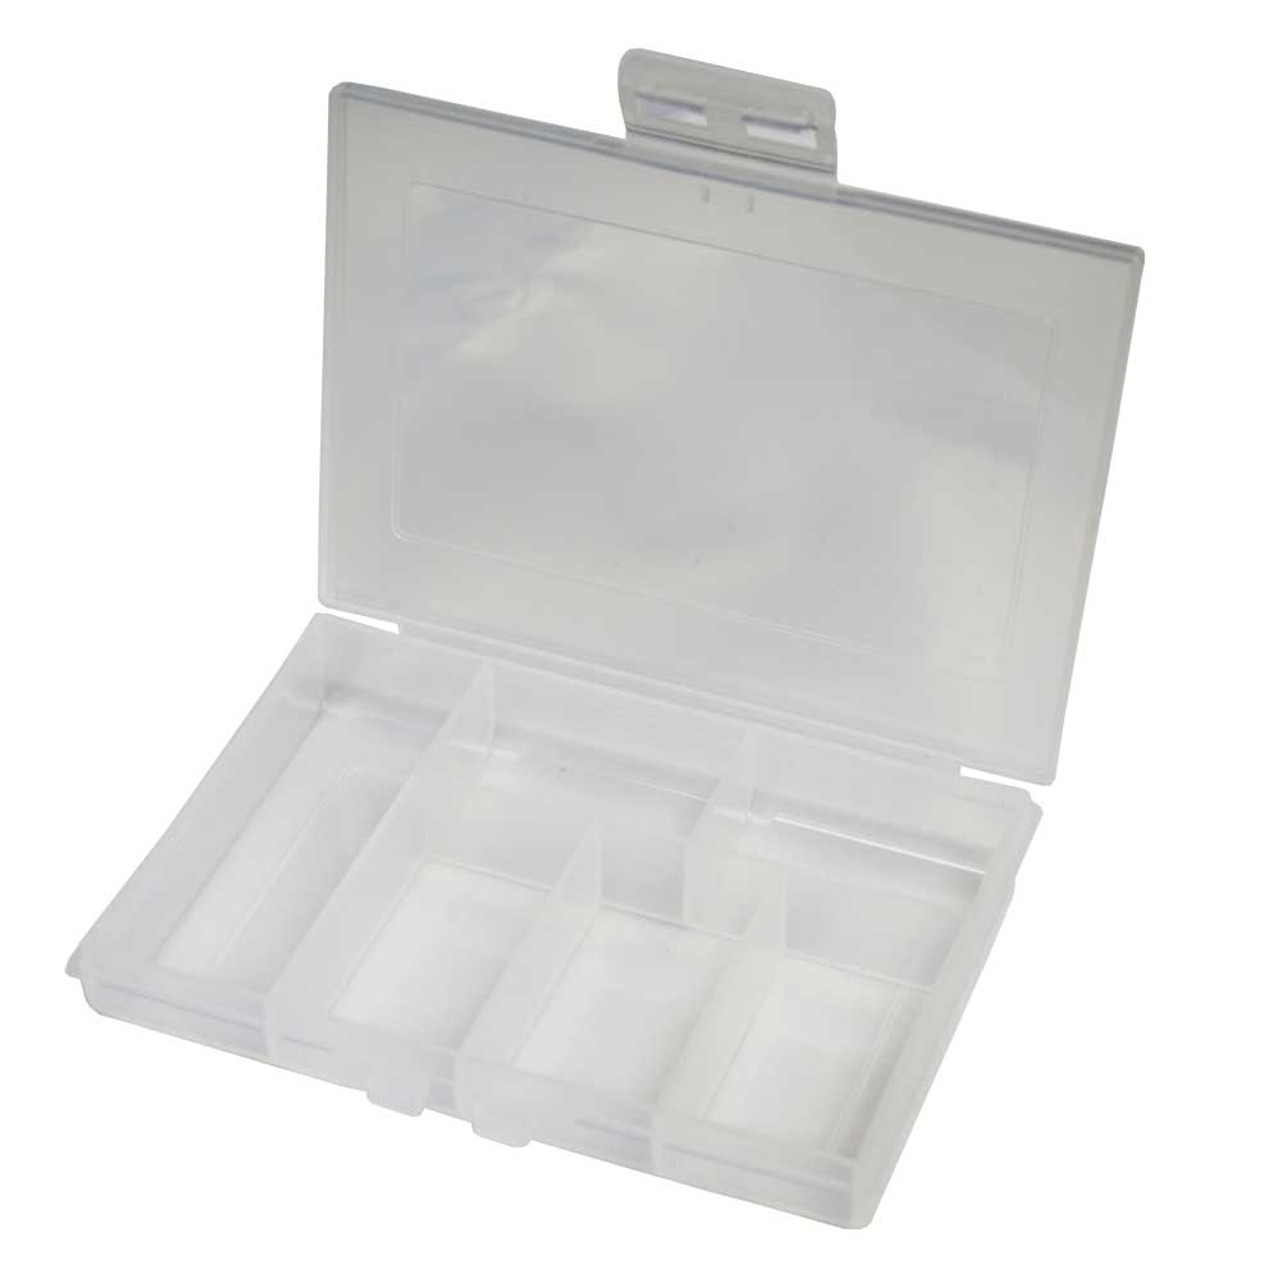 Frosted Plastic Organizer Box with 6 Compartments | Esslinger